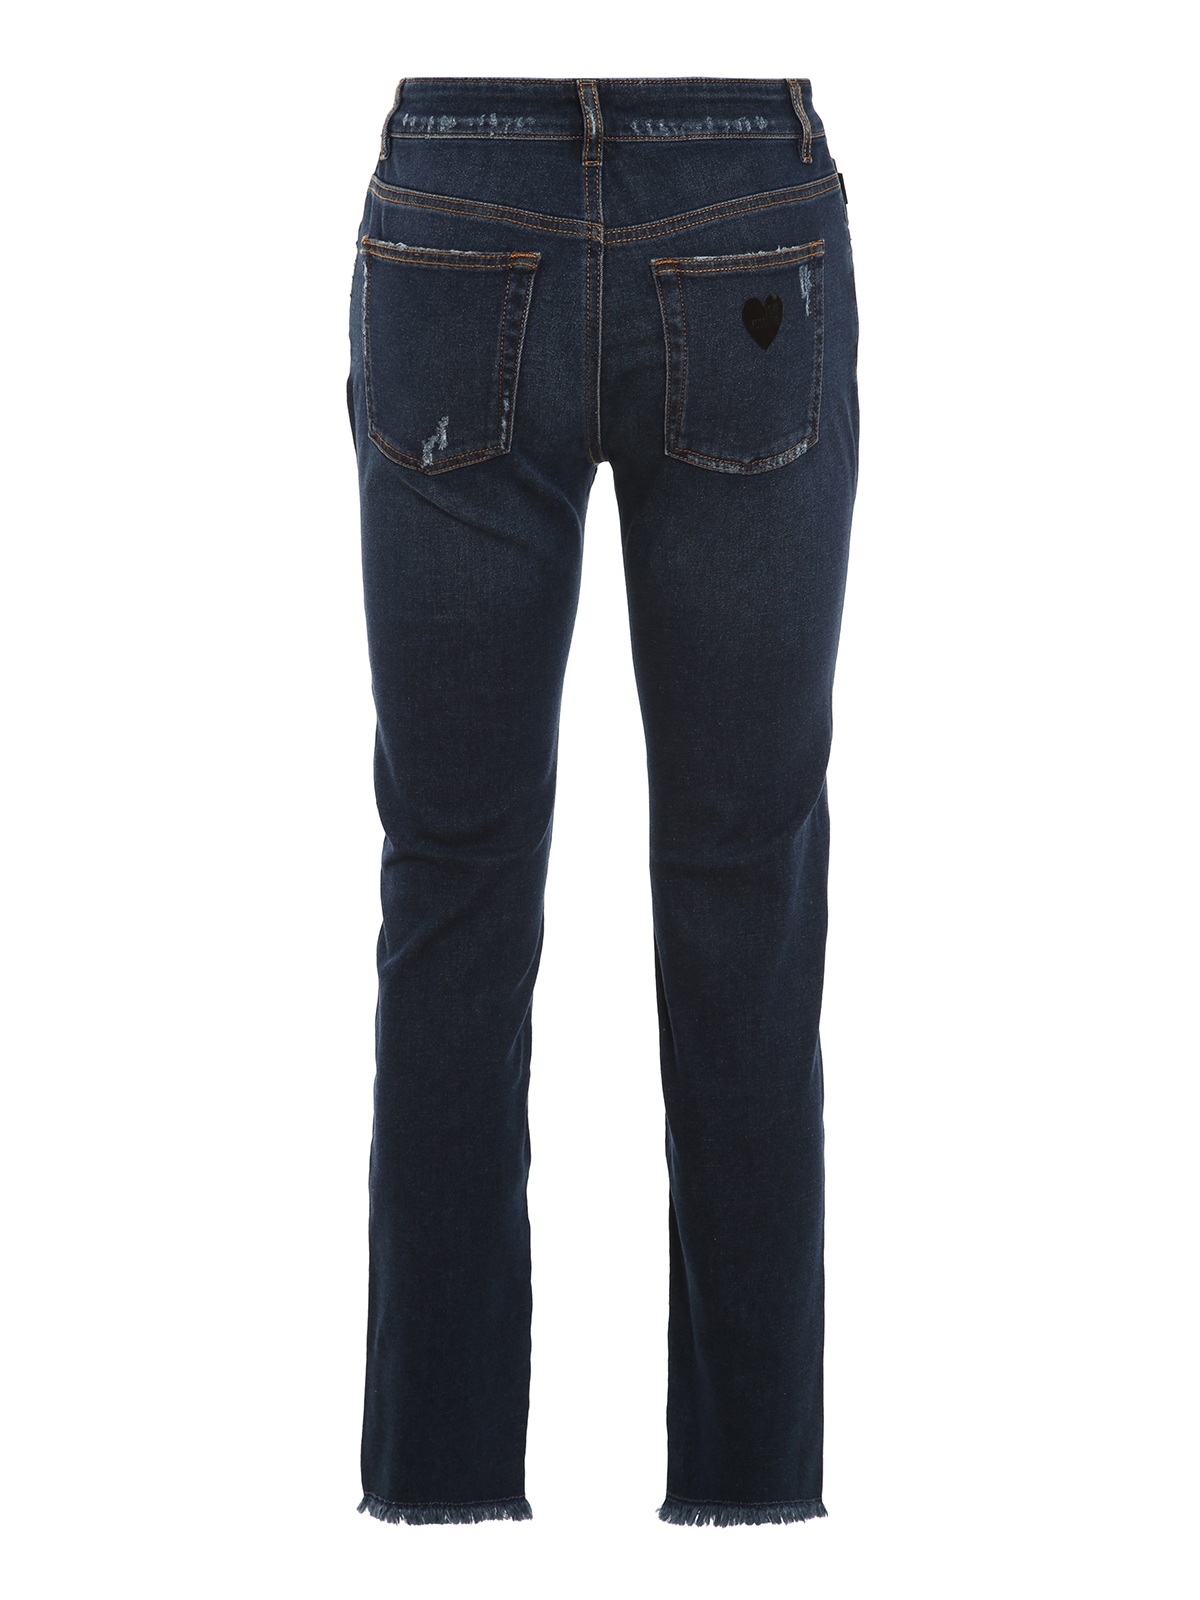 Voorstellen Speciaal Geboorteplaats Straight leg jeans Love Moschino - Cuore Thermo five pockets jeans -  WQ45401S3496775